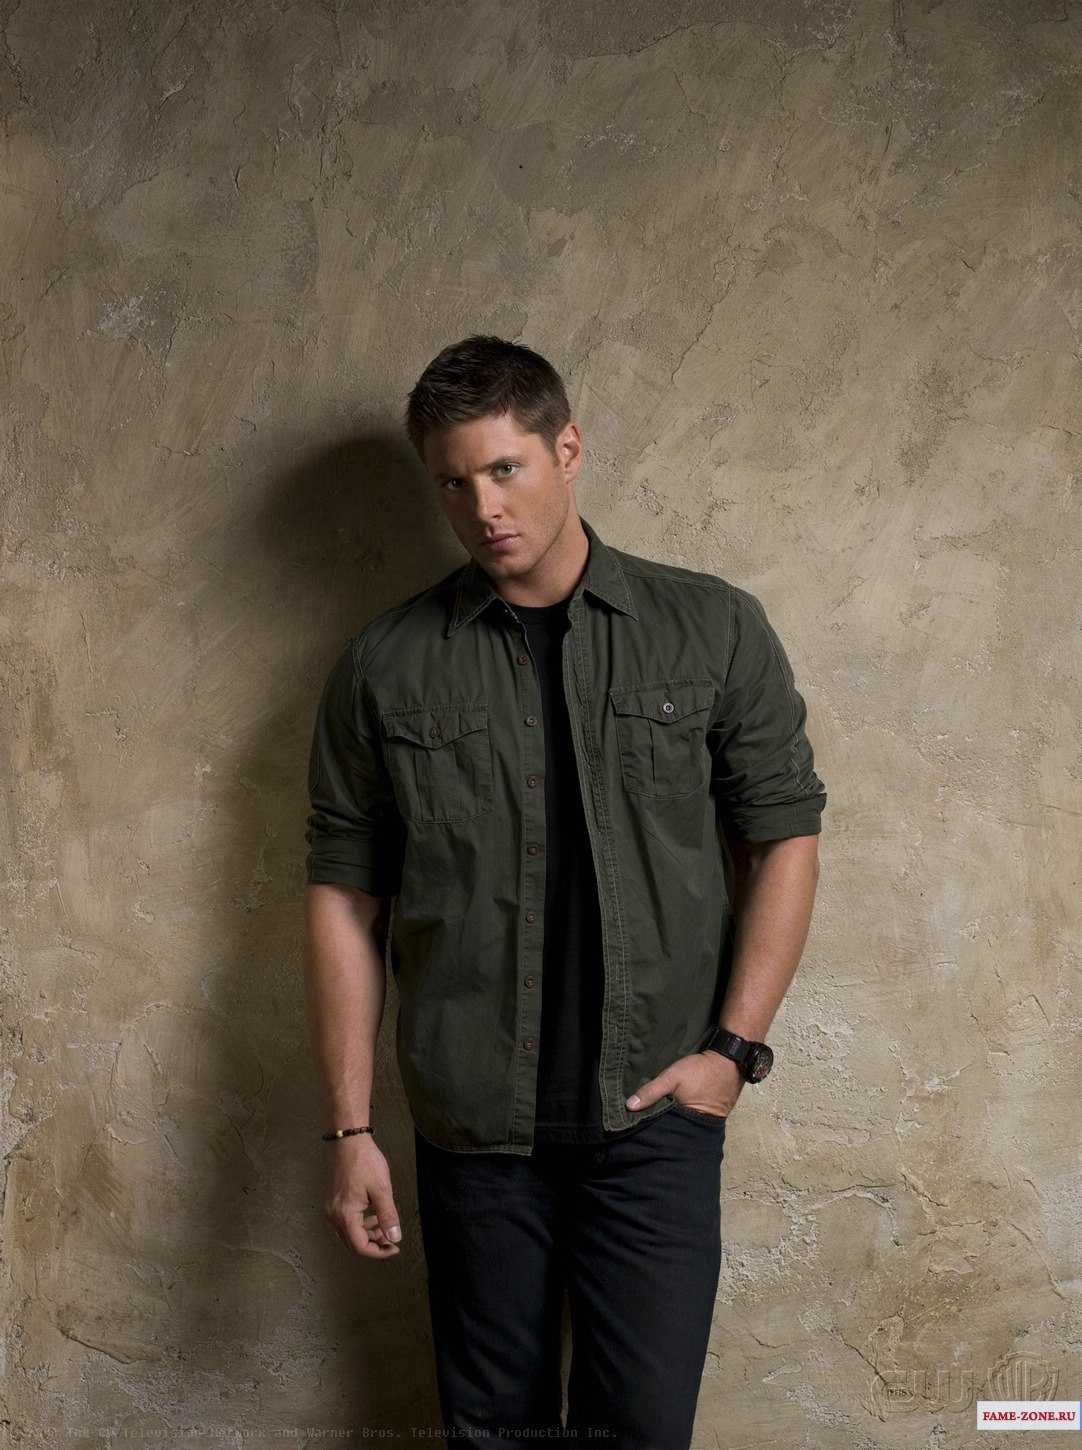 22584 Screensavers and Wallpapers Jensen Ackles for phone. Download people, actors, men, jensen ackles pictures for free